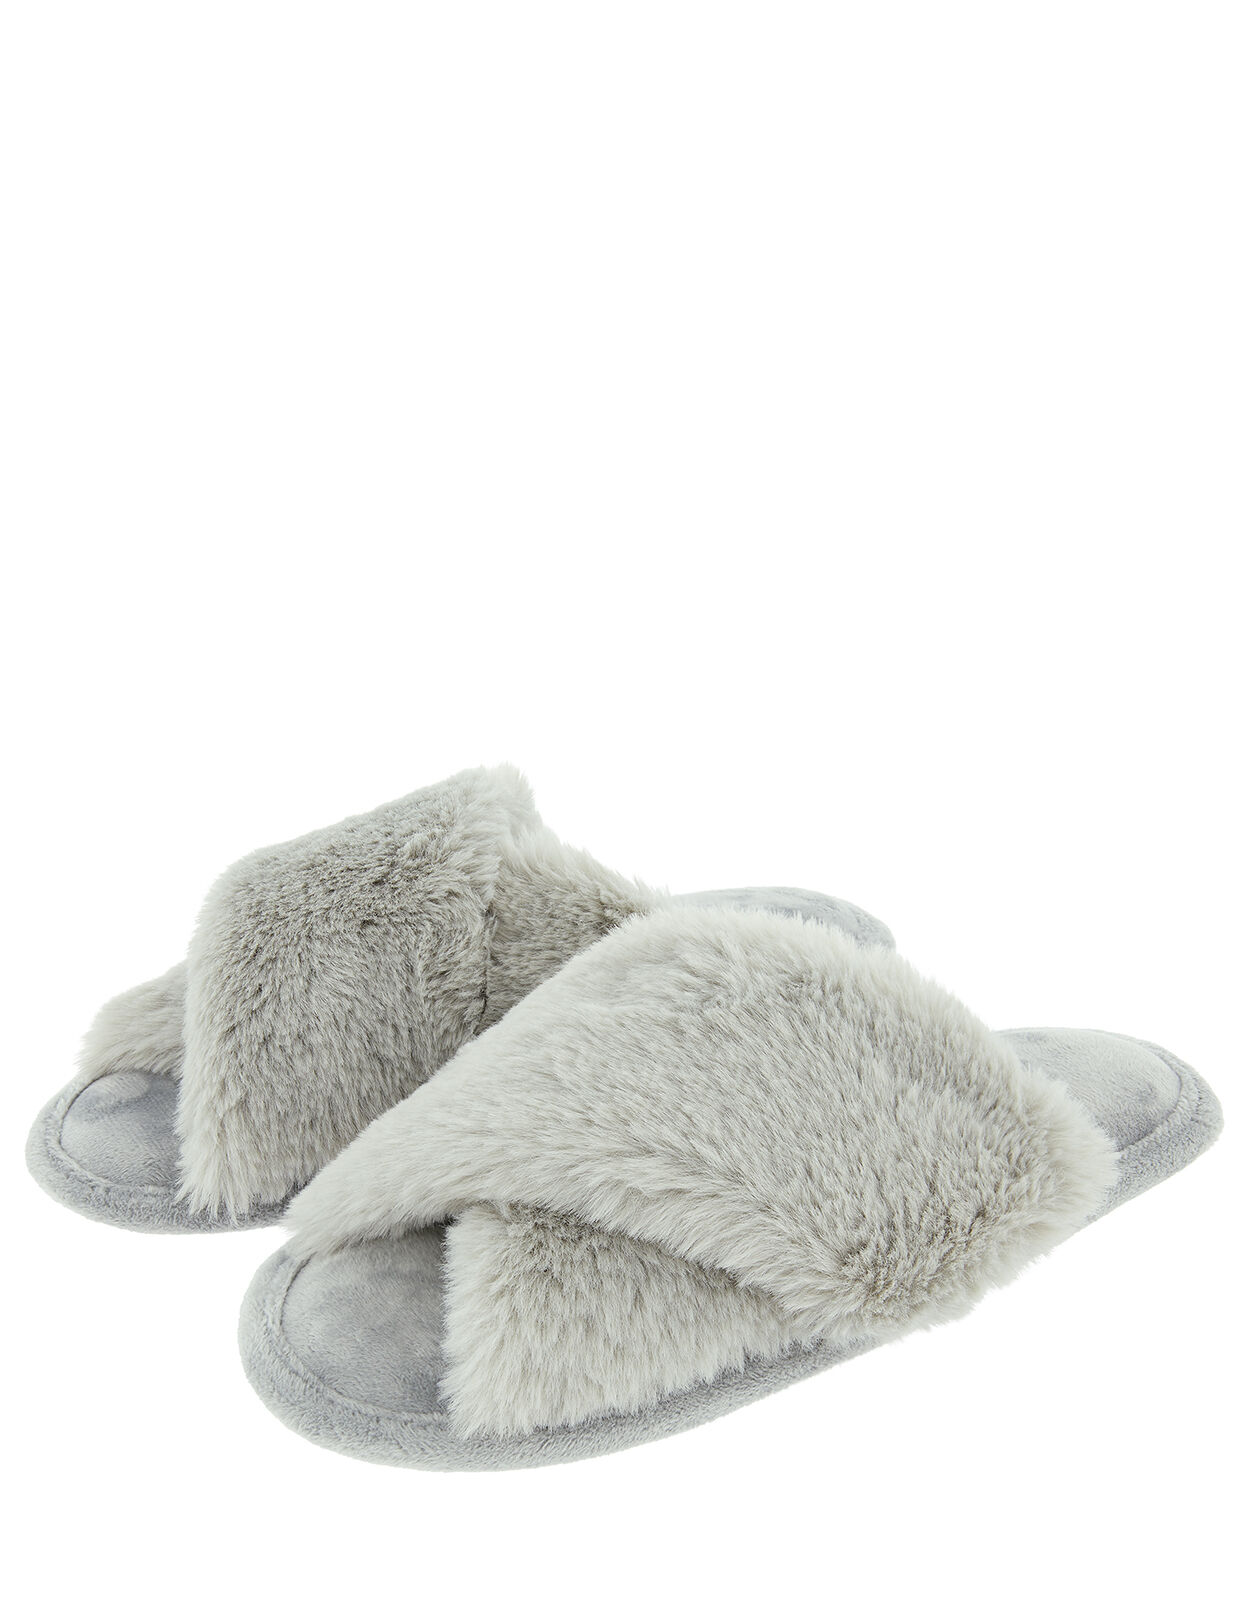 womens slippers accessorize